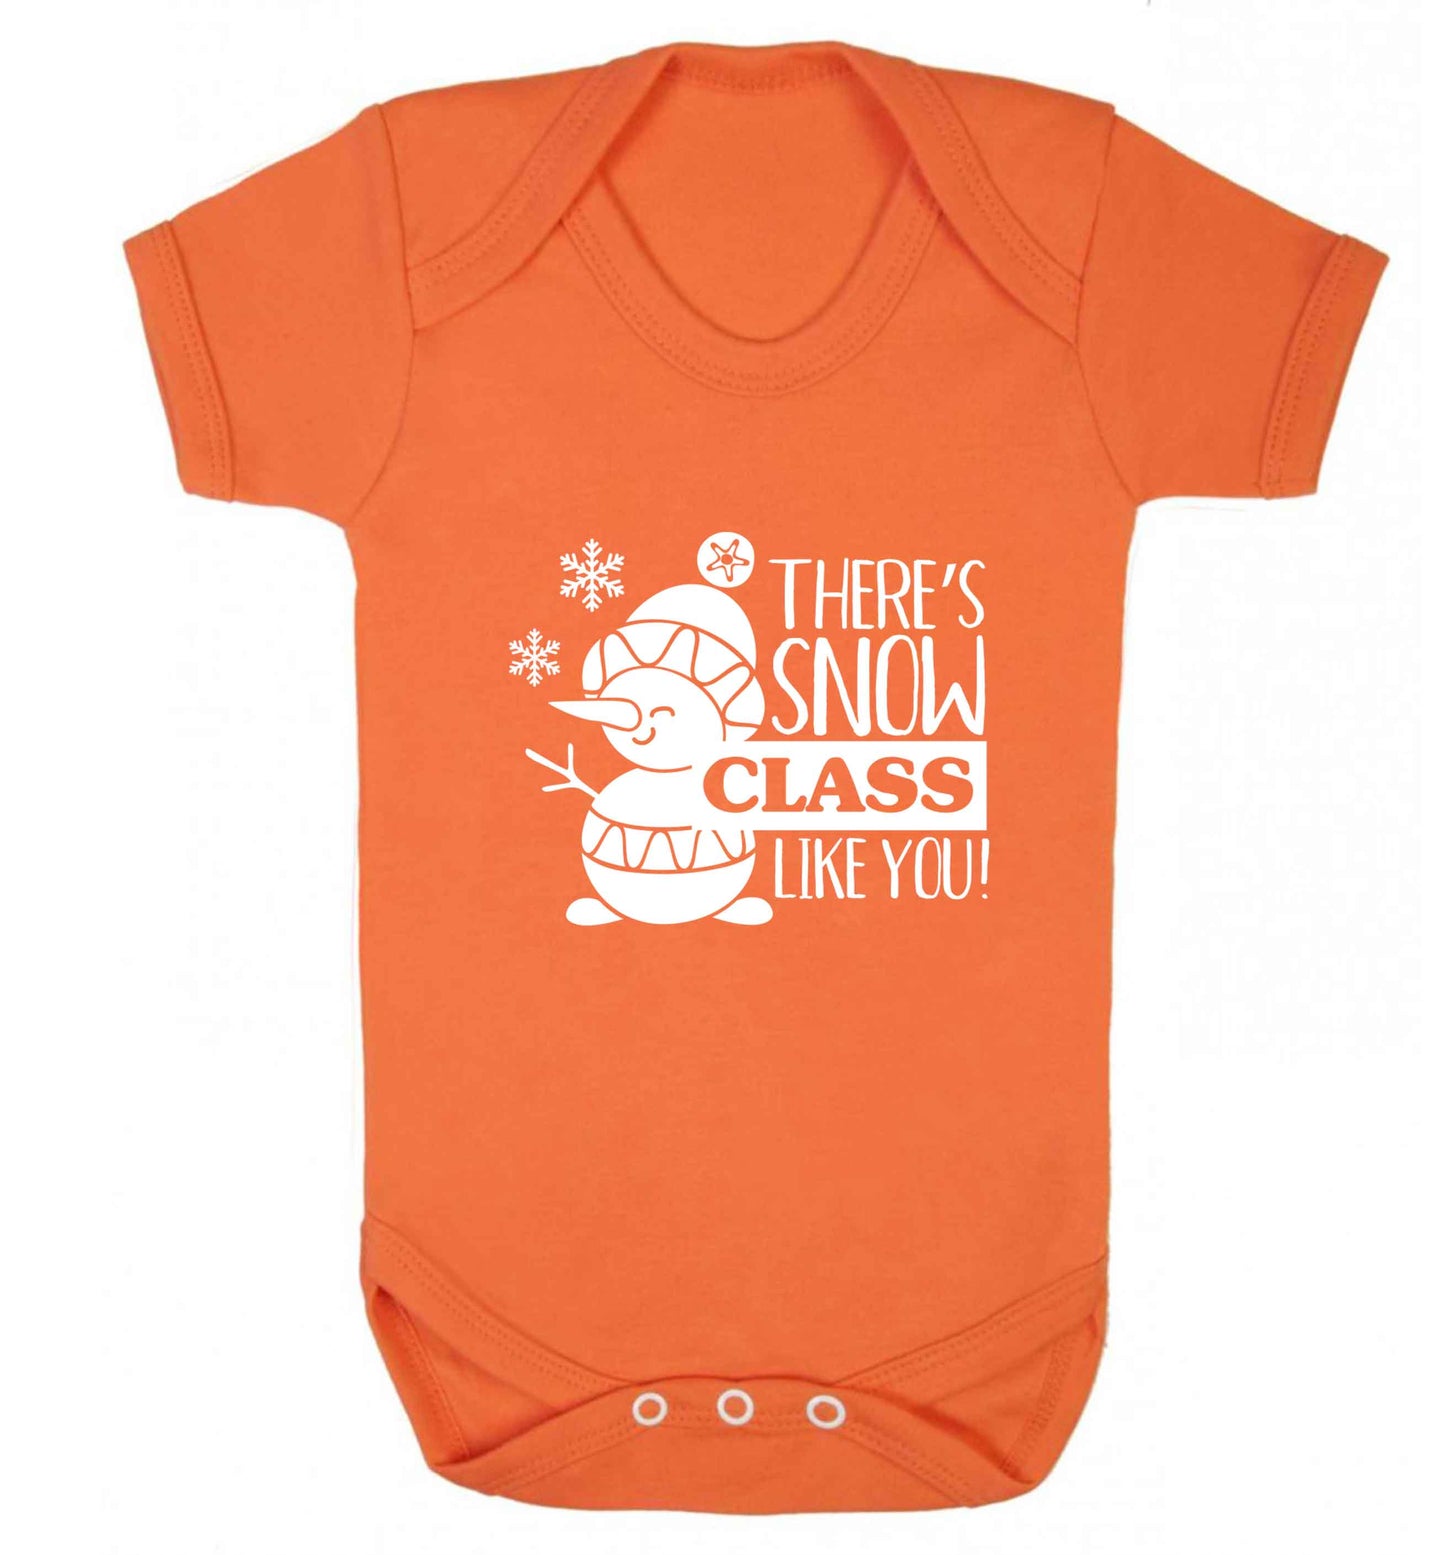 There's snow class like you baby vest orange 18-24 months